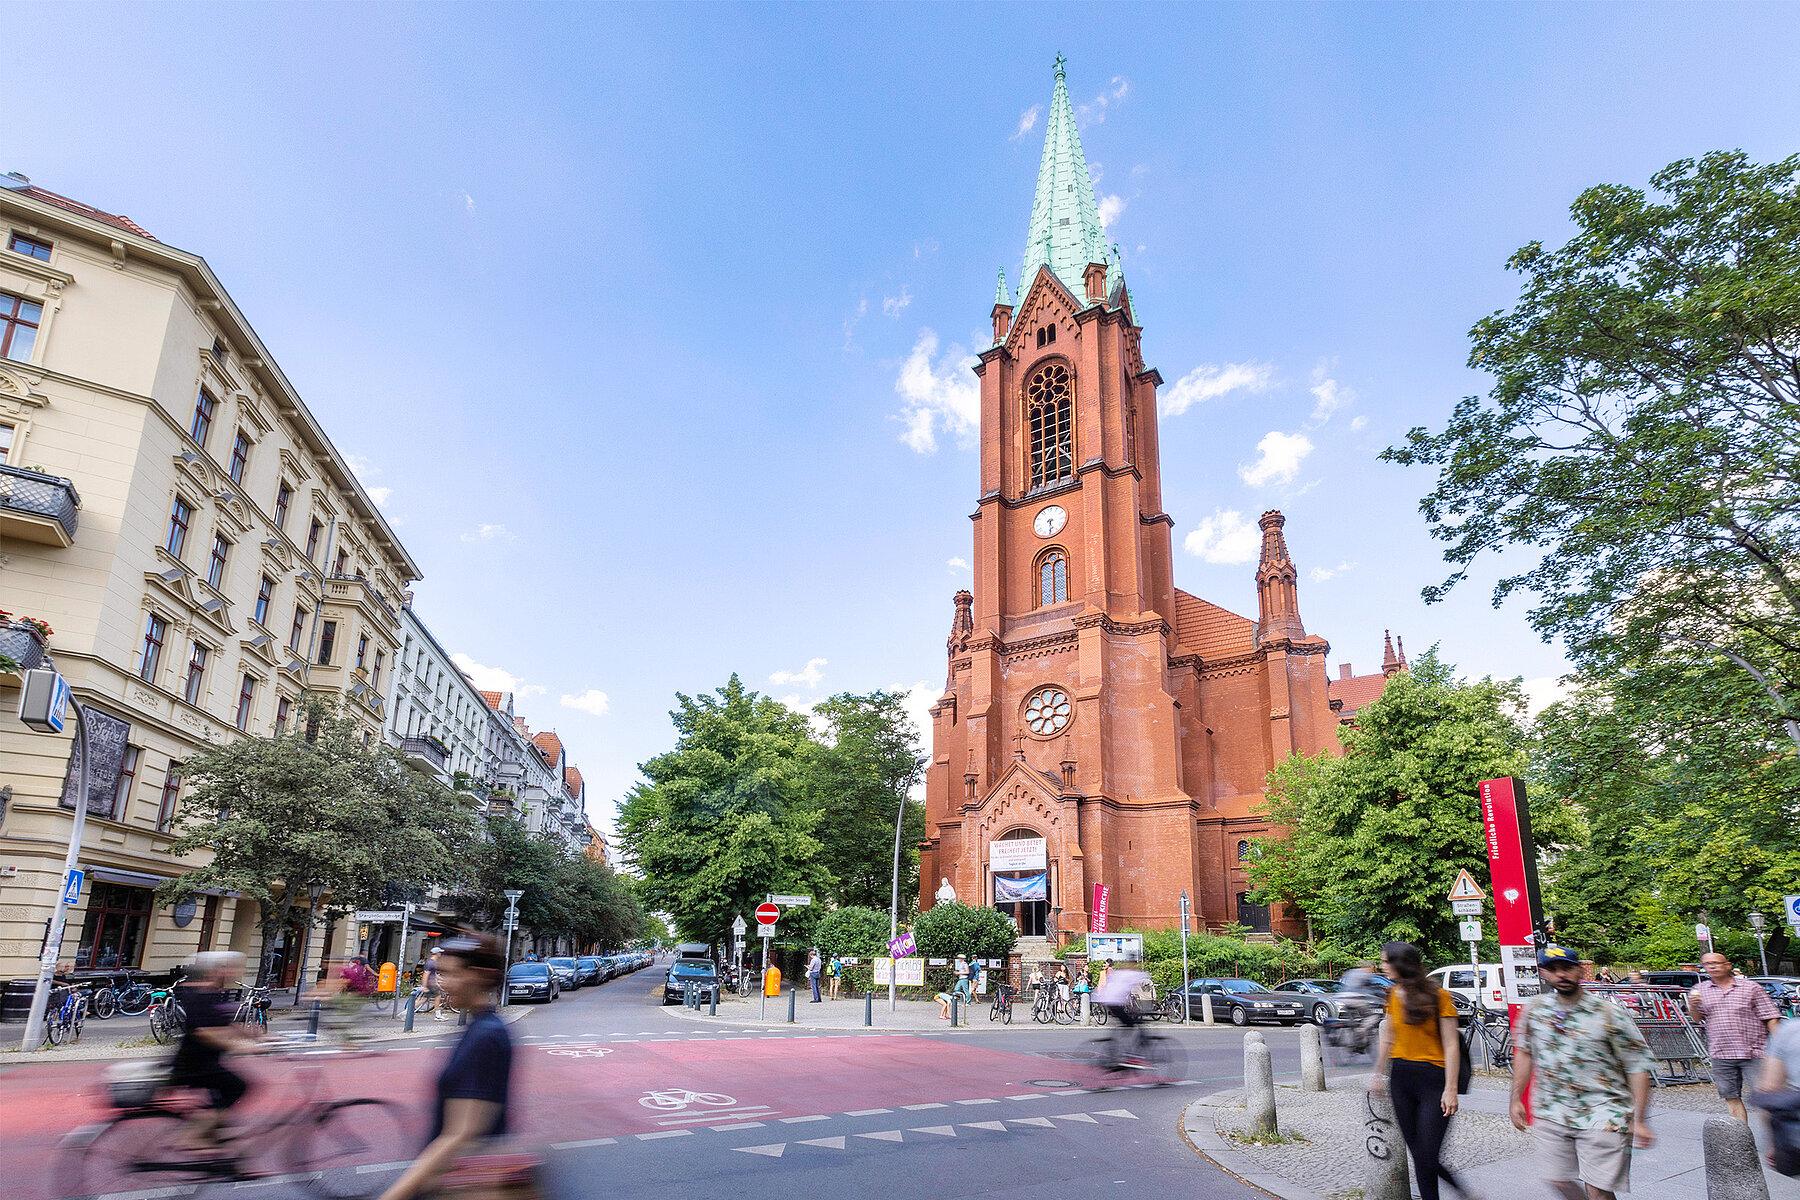 The Gethsemanekirche made of red bricks is located at a street crossing. People pass by on foot or on bicycles.